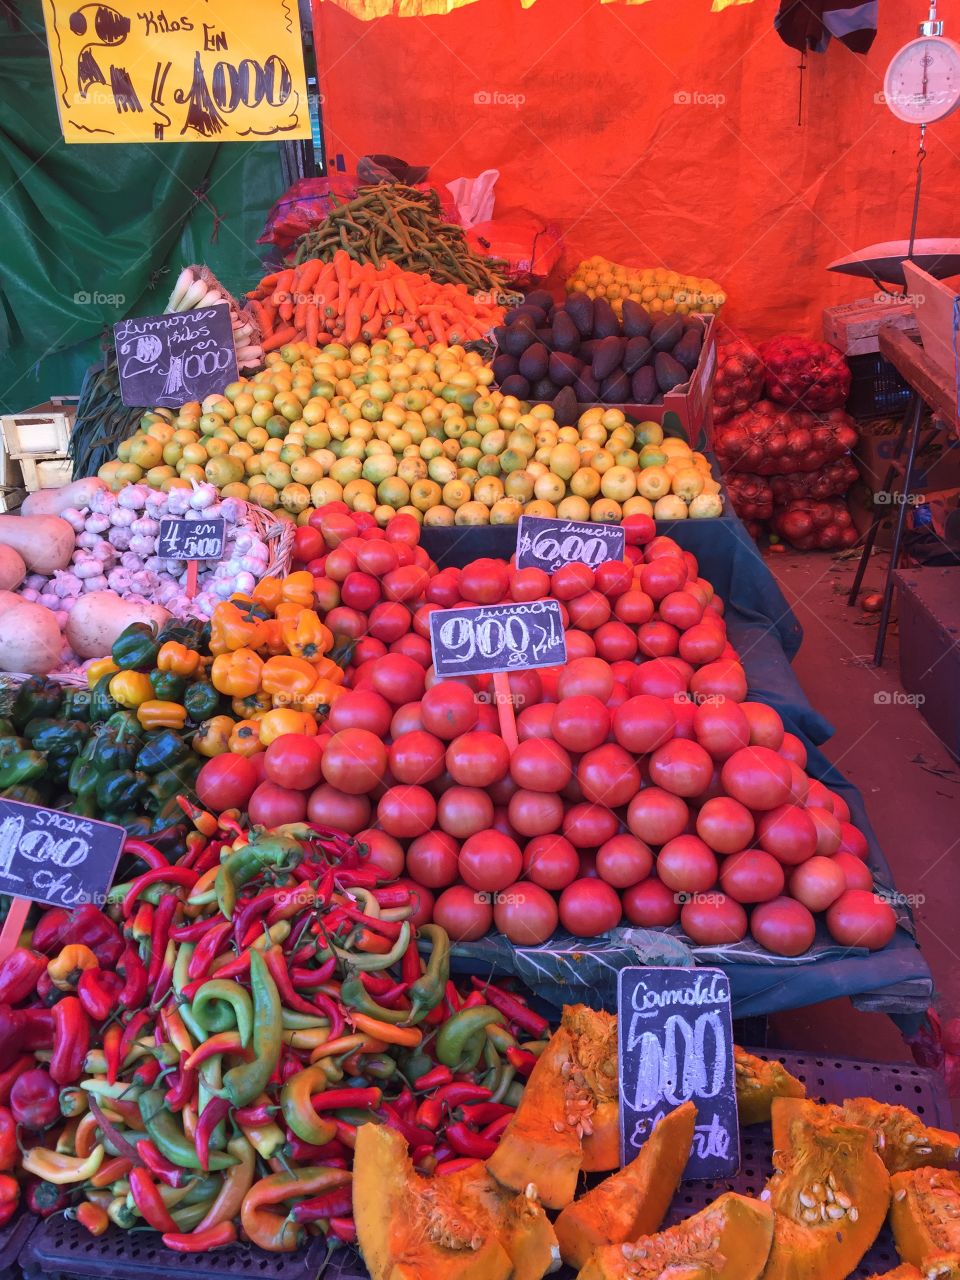 Weekend market vegetable stand, full of color